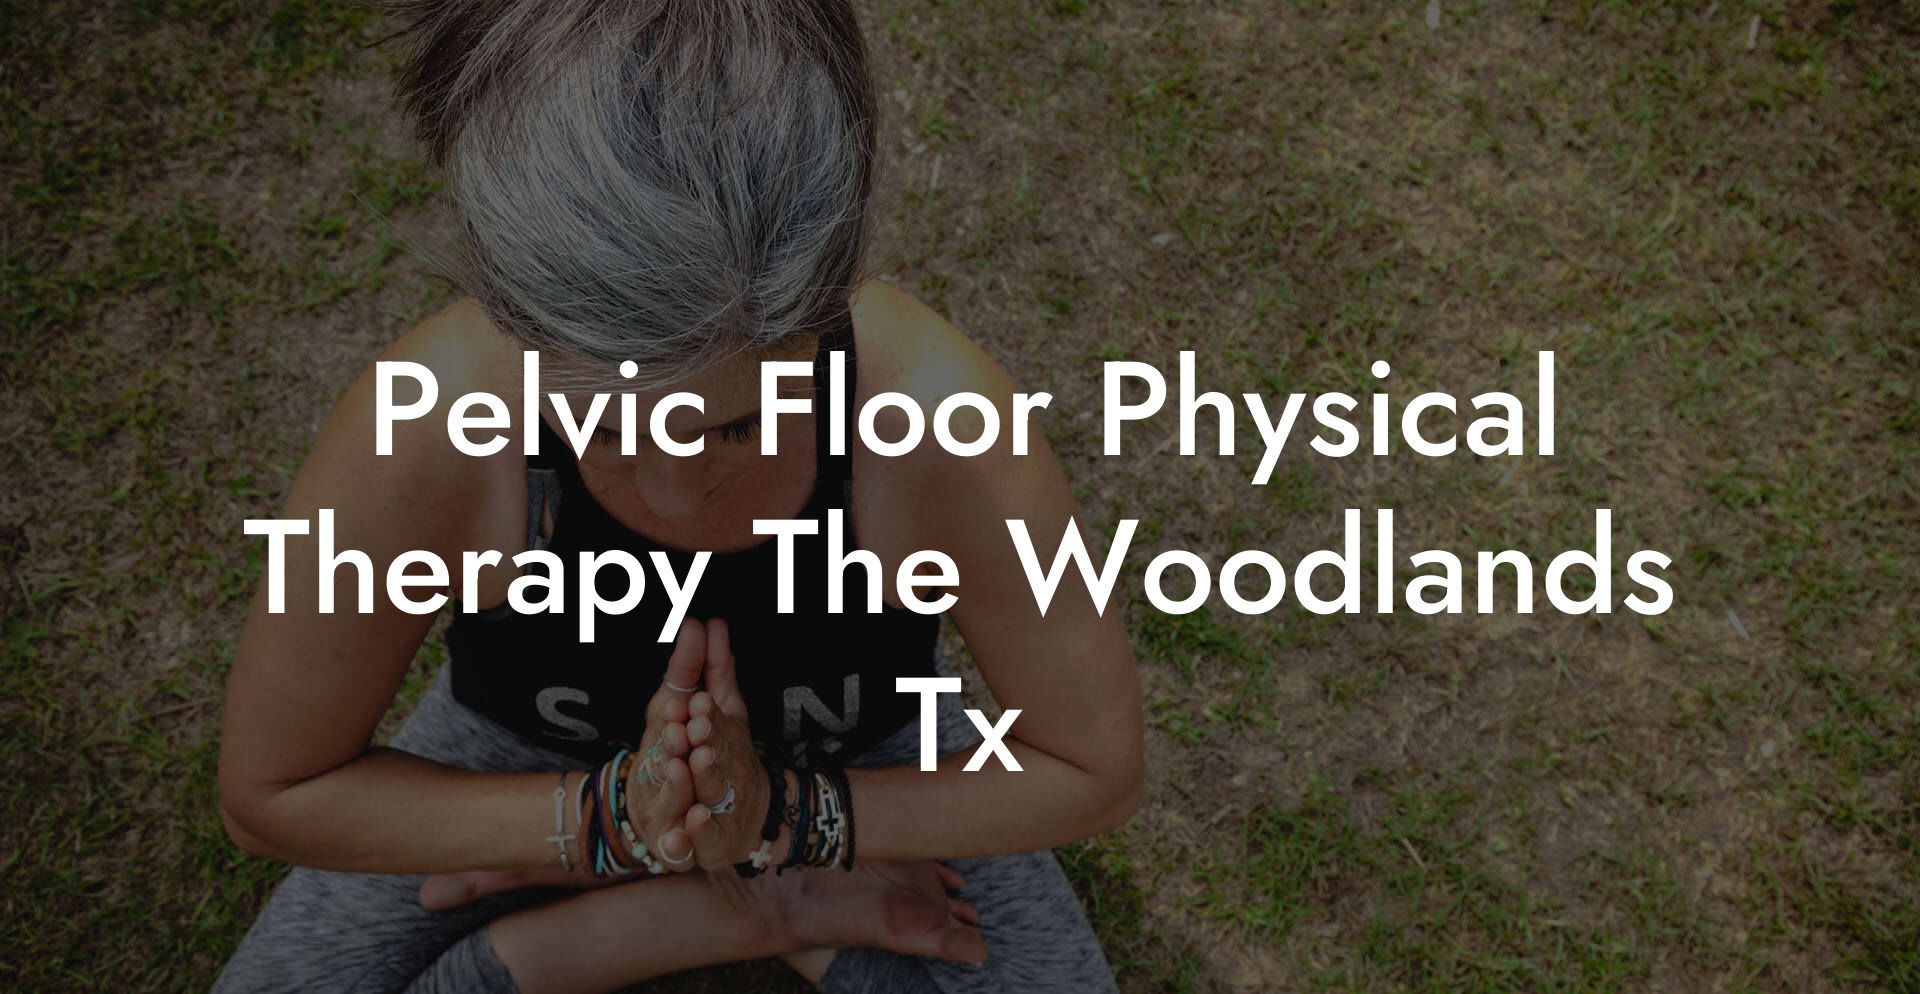 Pelvic Floor Physical Therapy The Woodlands Tx